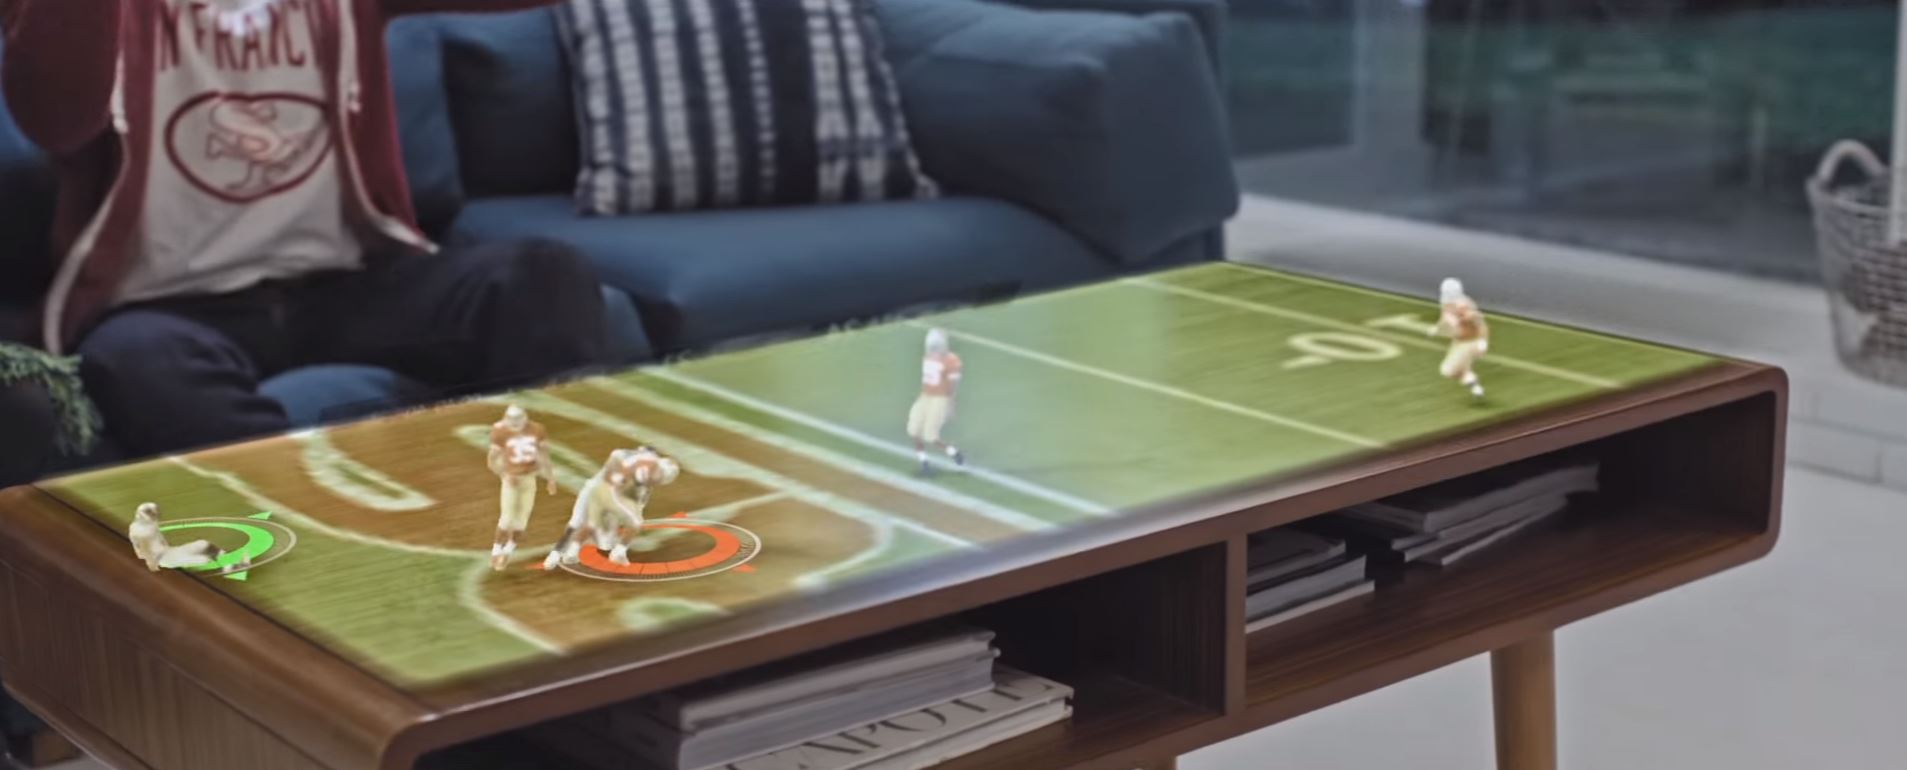 Microsoft HoloLens demo of an NFL game rendered live on a coffee table